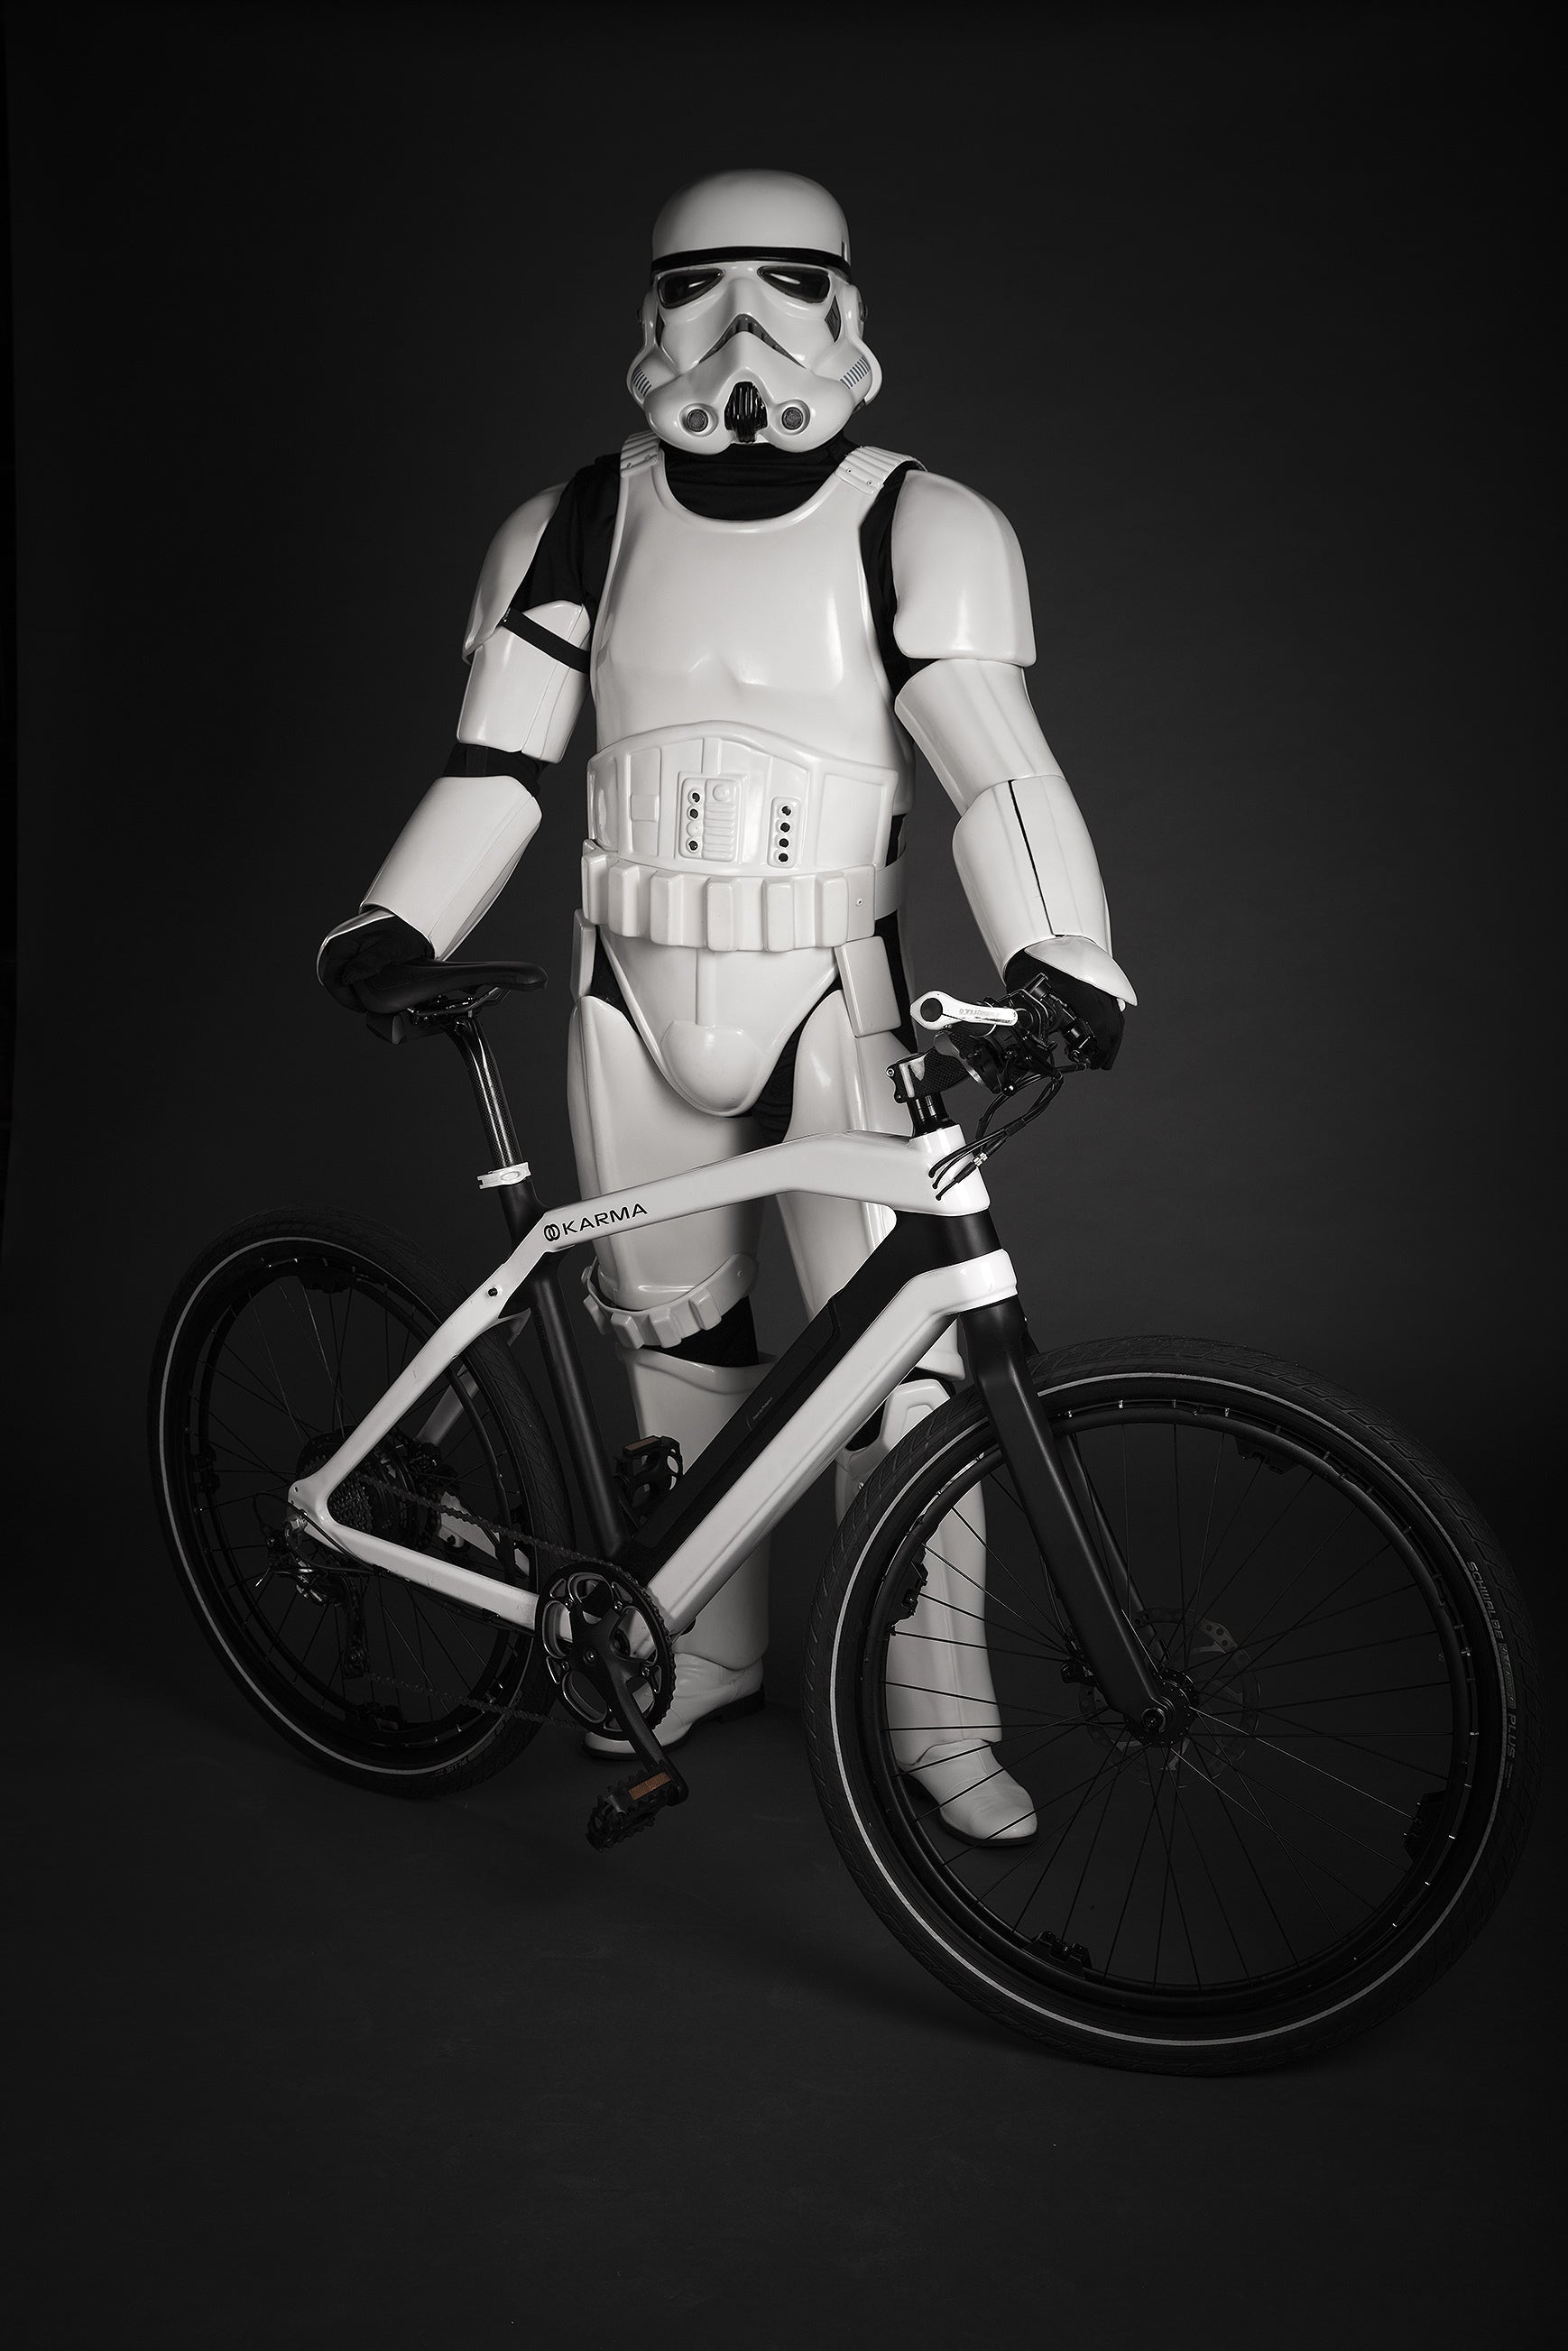 This electric bike is made for Imperial Stormtroopers | PCWorld